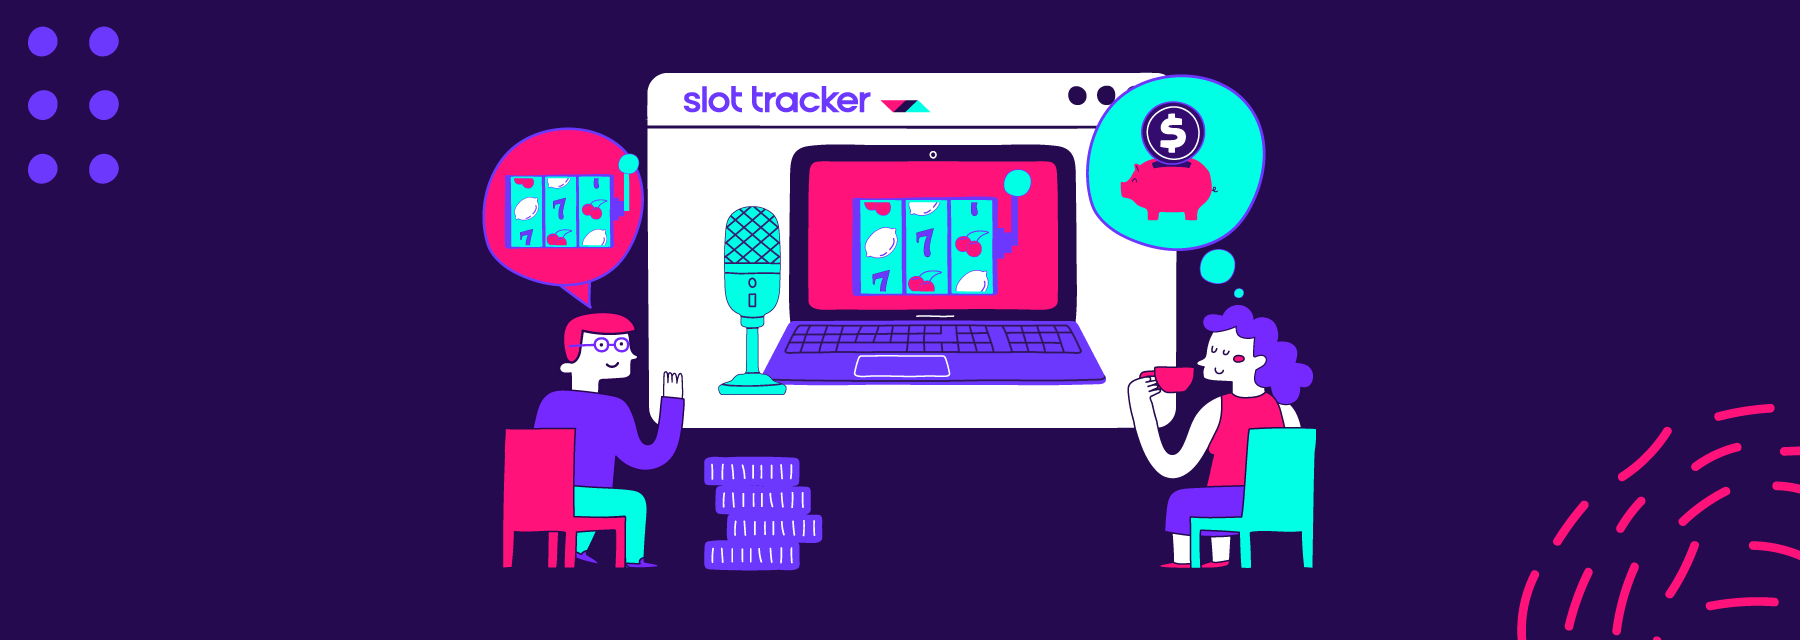 Streaming Event mit Slot Tracker